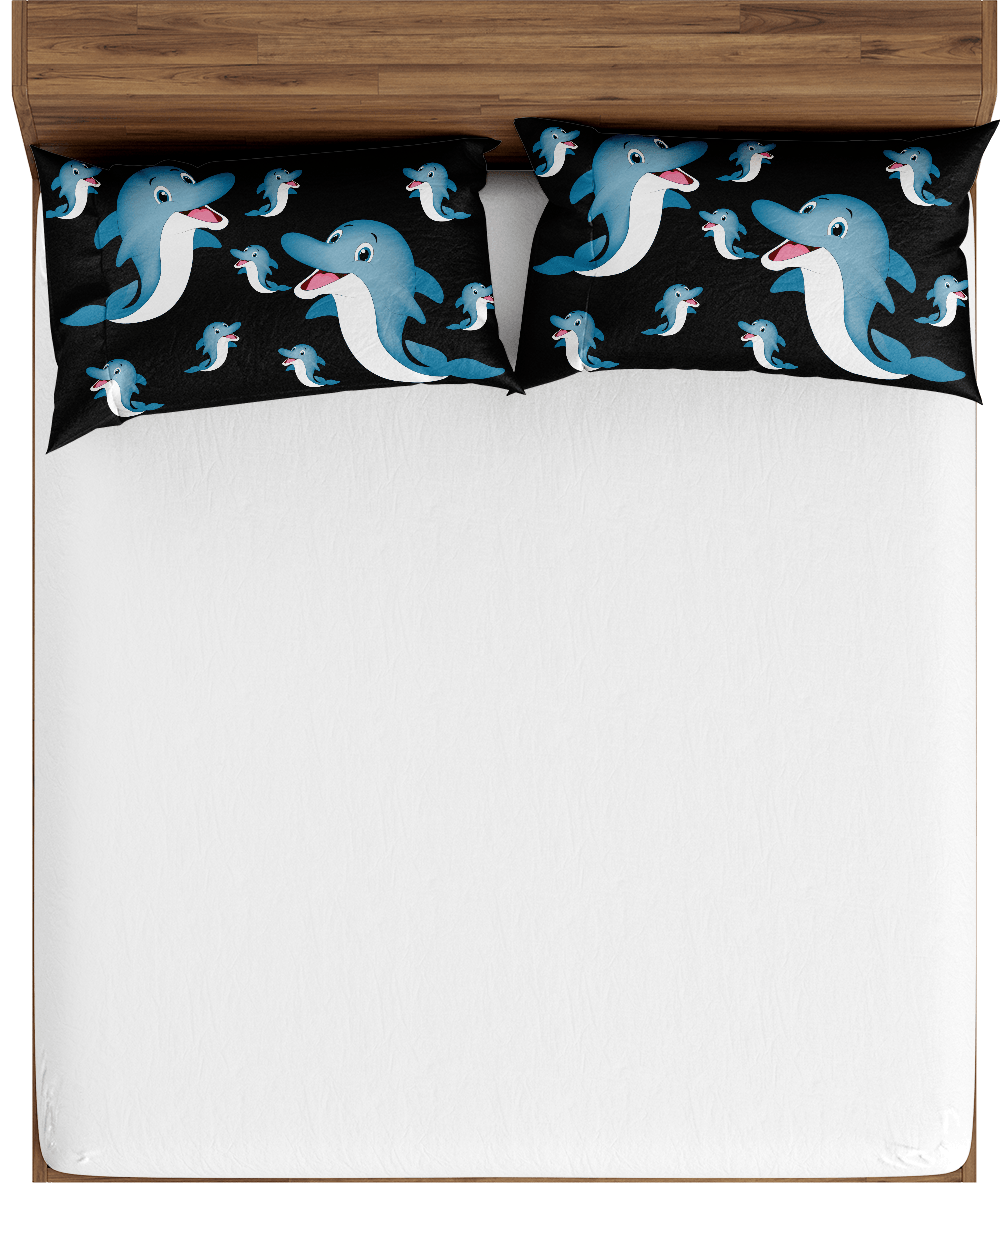 Dolphin Bed Pillows - fungear.com.au